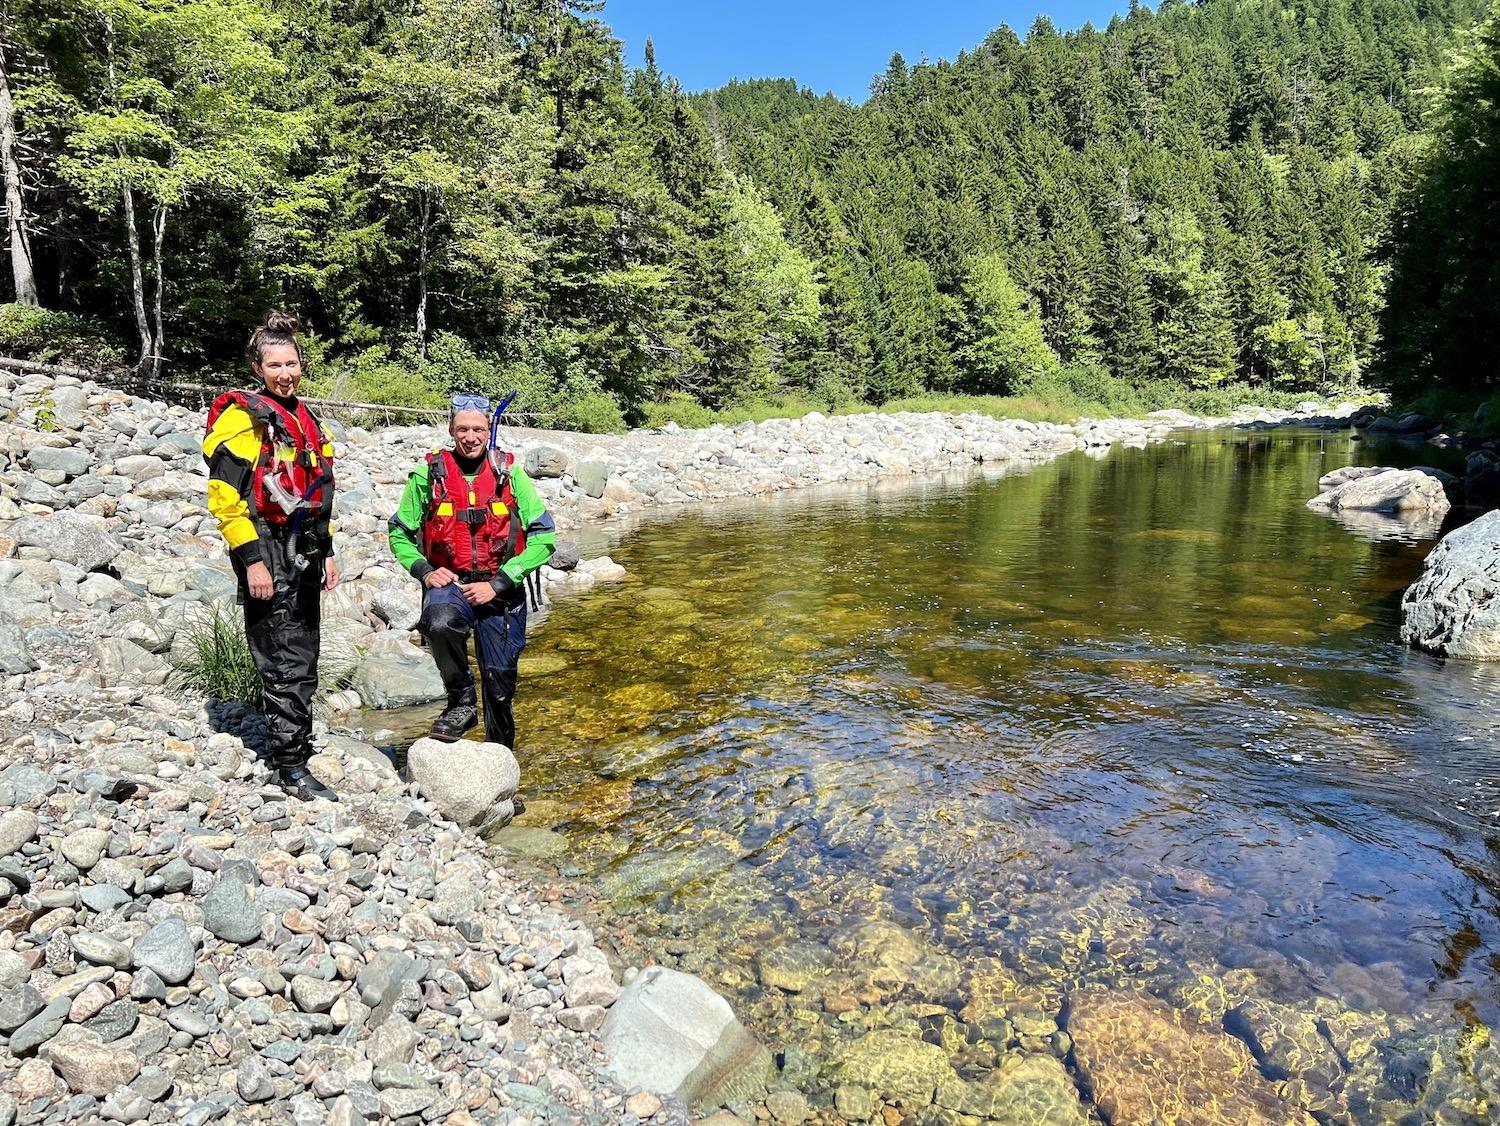 Parks Canada's Danielle Latendresse and John Robinson are working to help endangered Atlantic salmon in Fundy National Park.